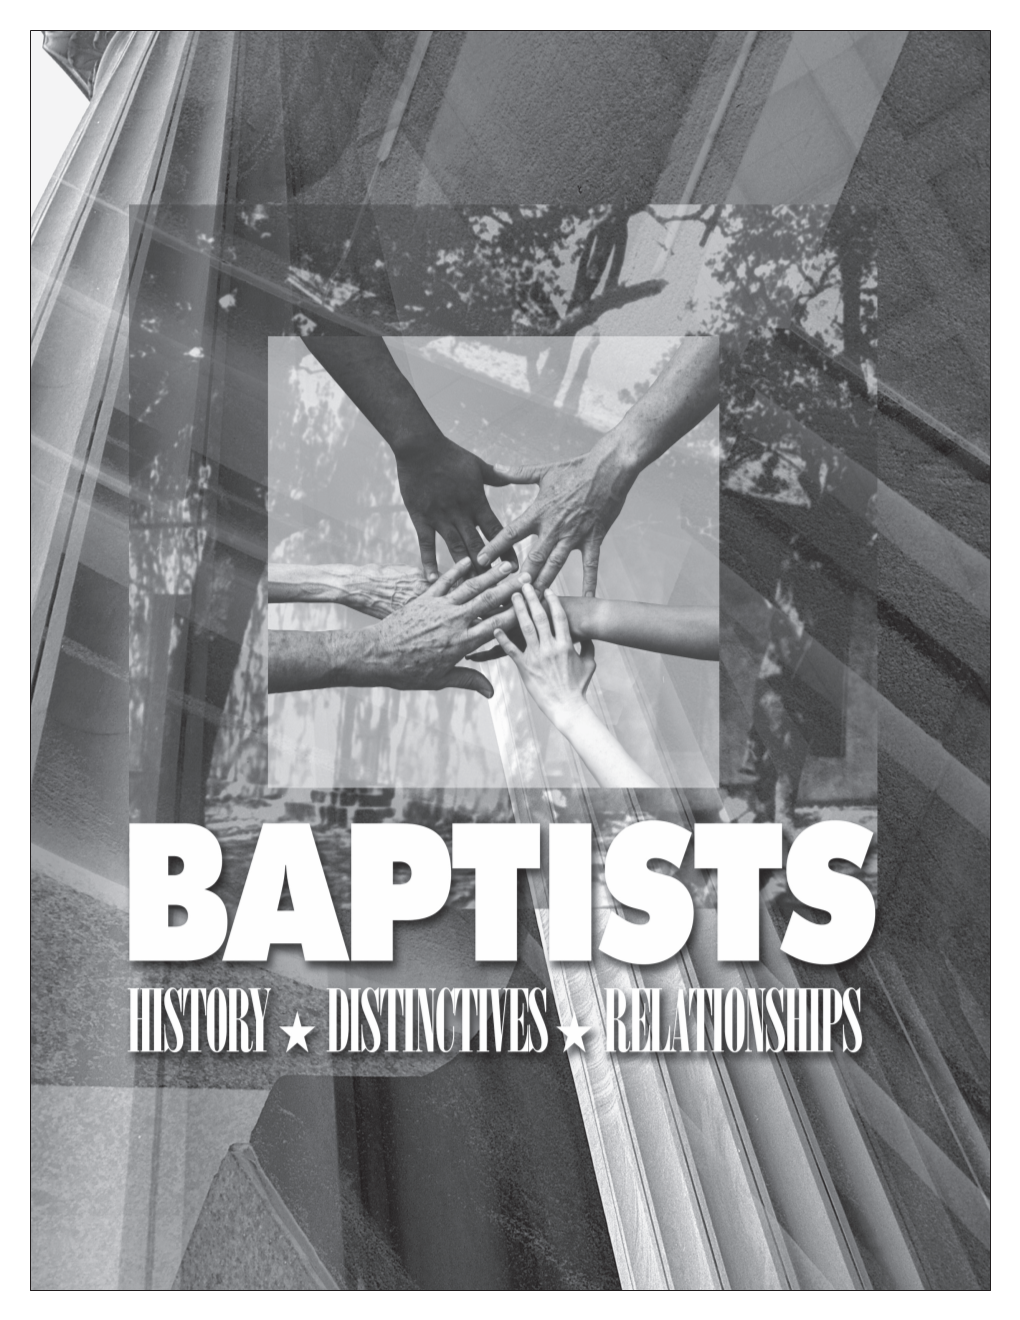 Baptists, Who They Are, and What They Are About